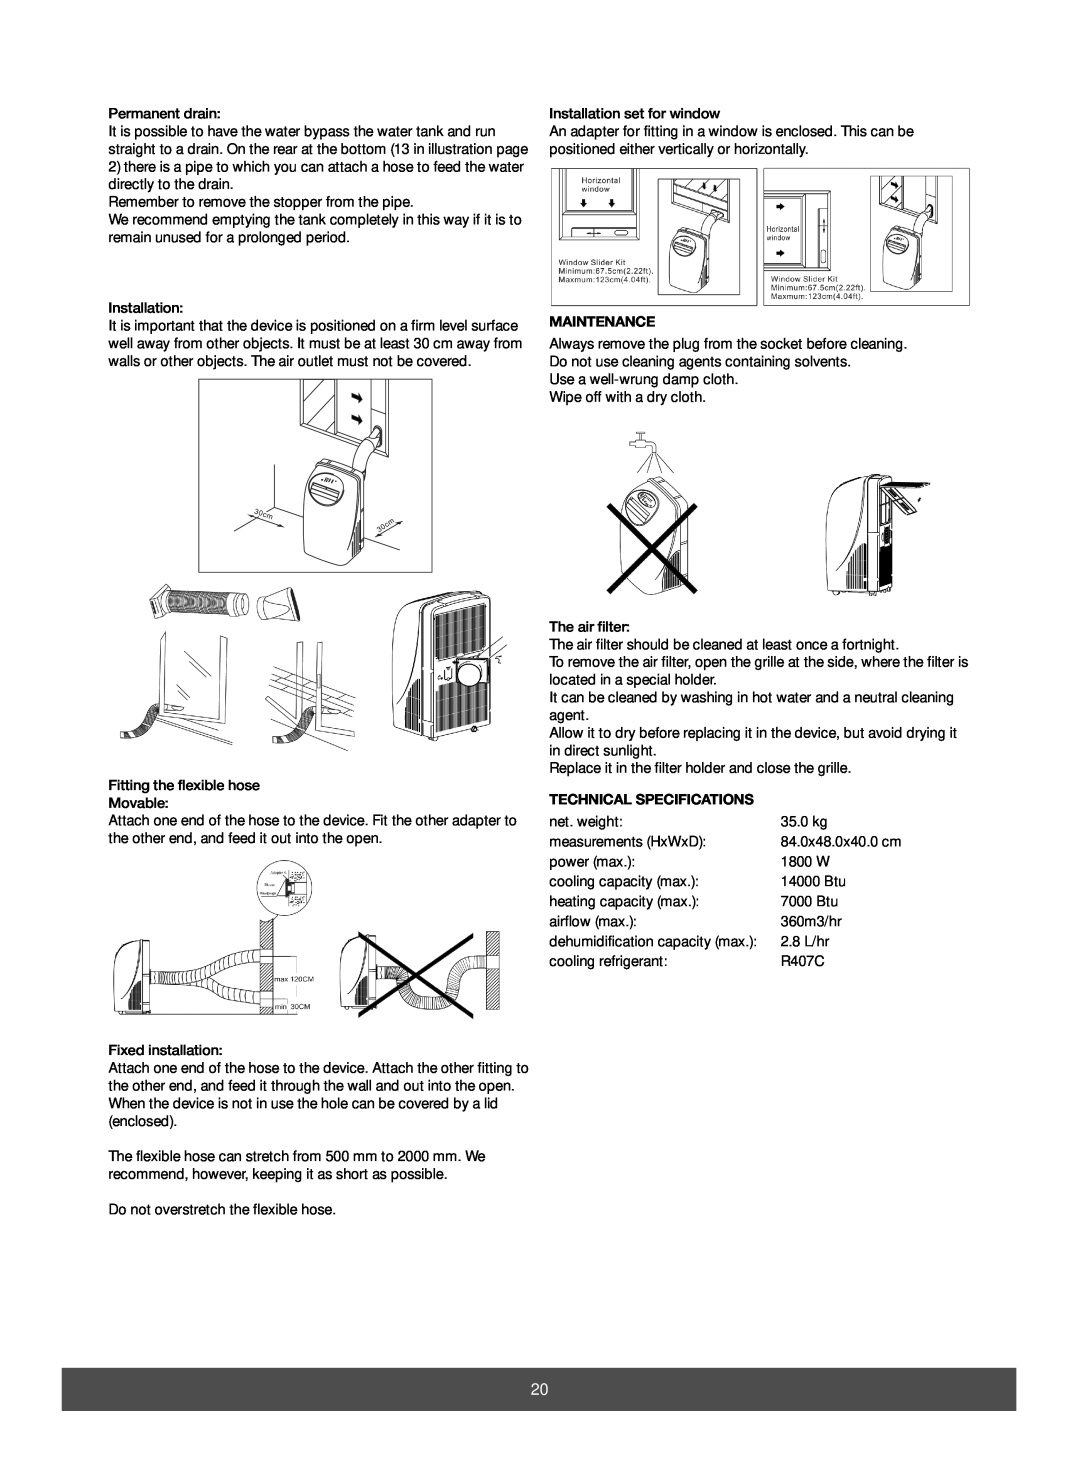 Melissa 673-003 manual Maintenance, Technical Specifications 